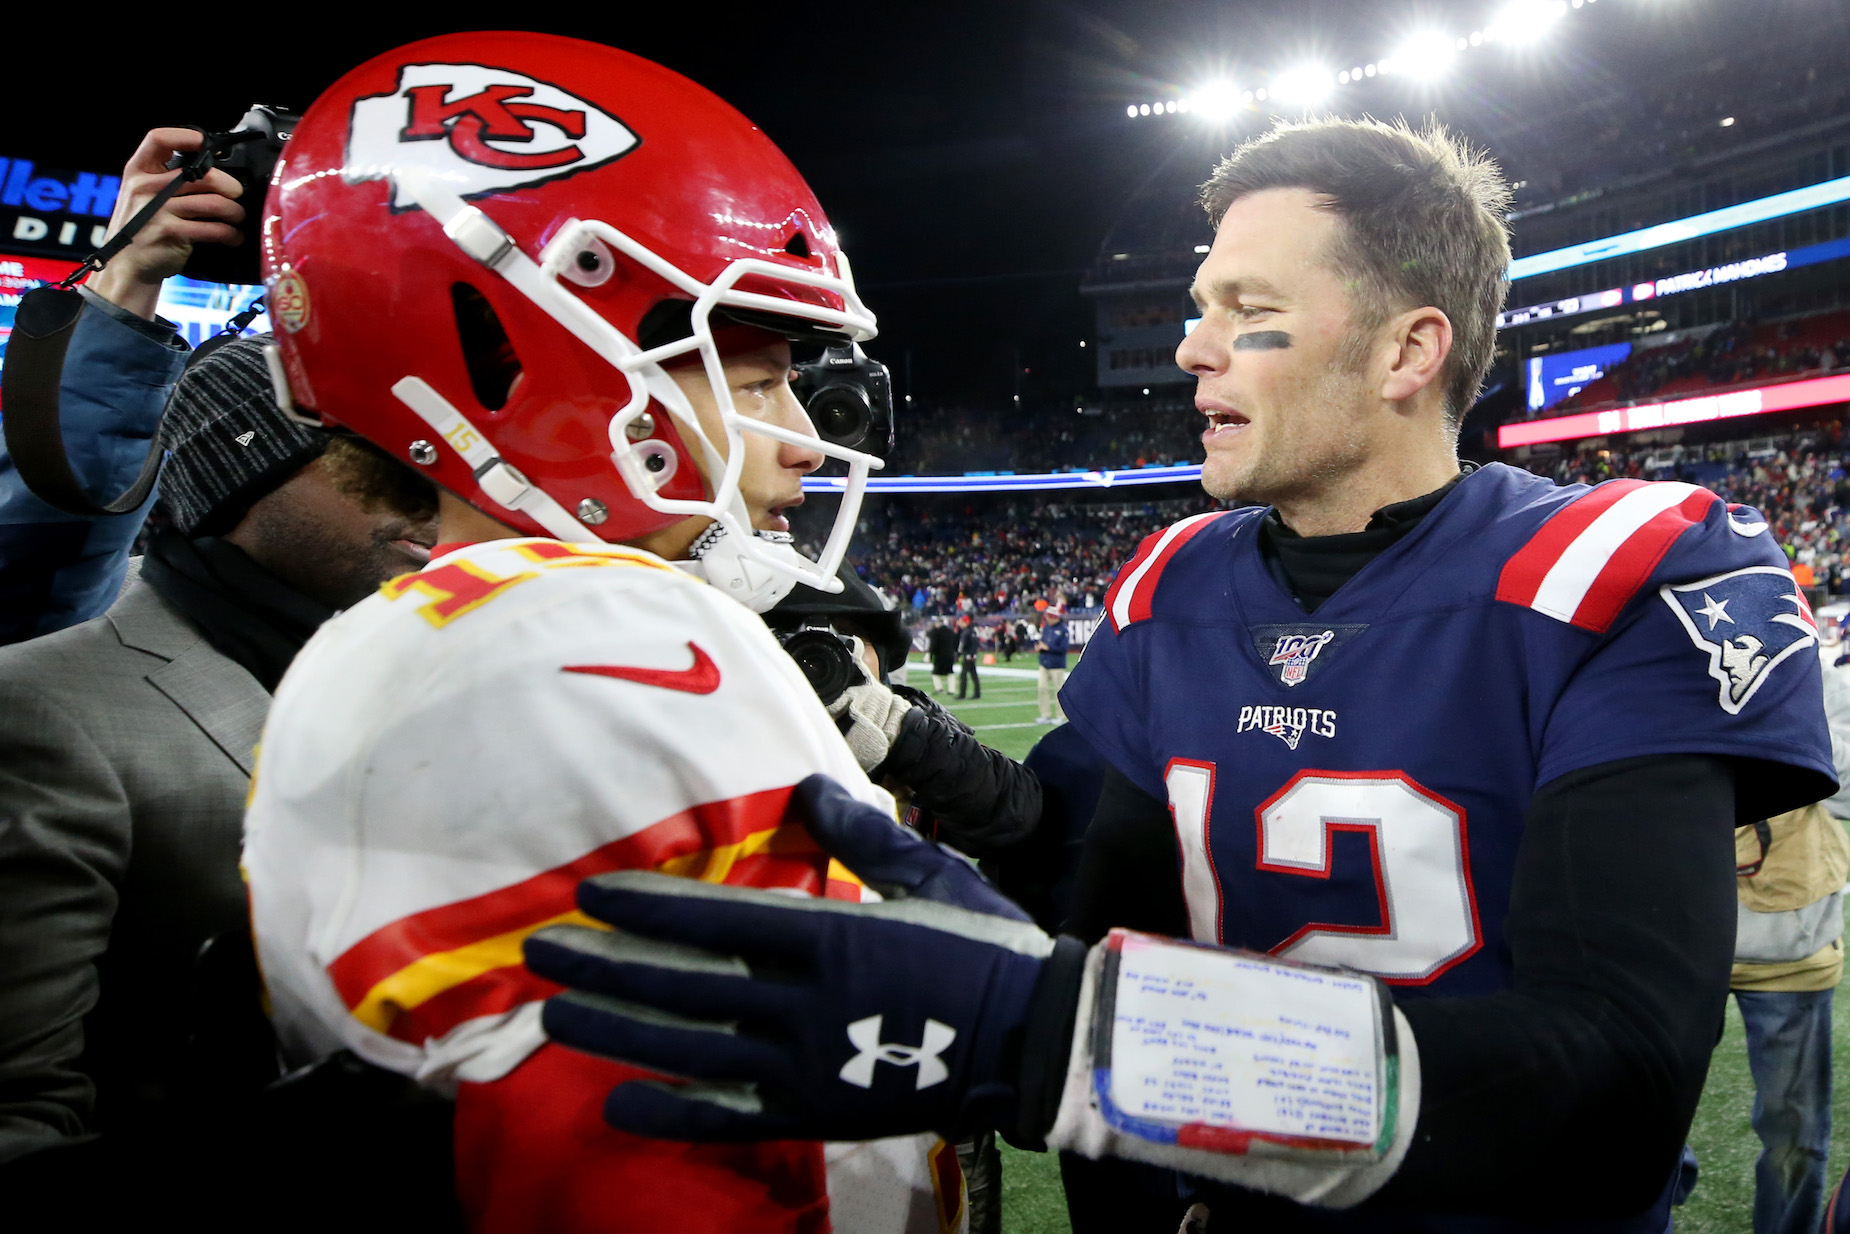 A former Chief thinks that Patrick Mahomes can win more Super Bowls than Tom Brady.